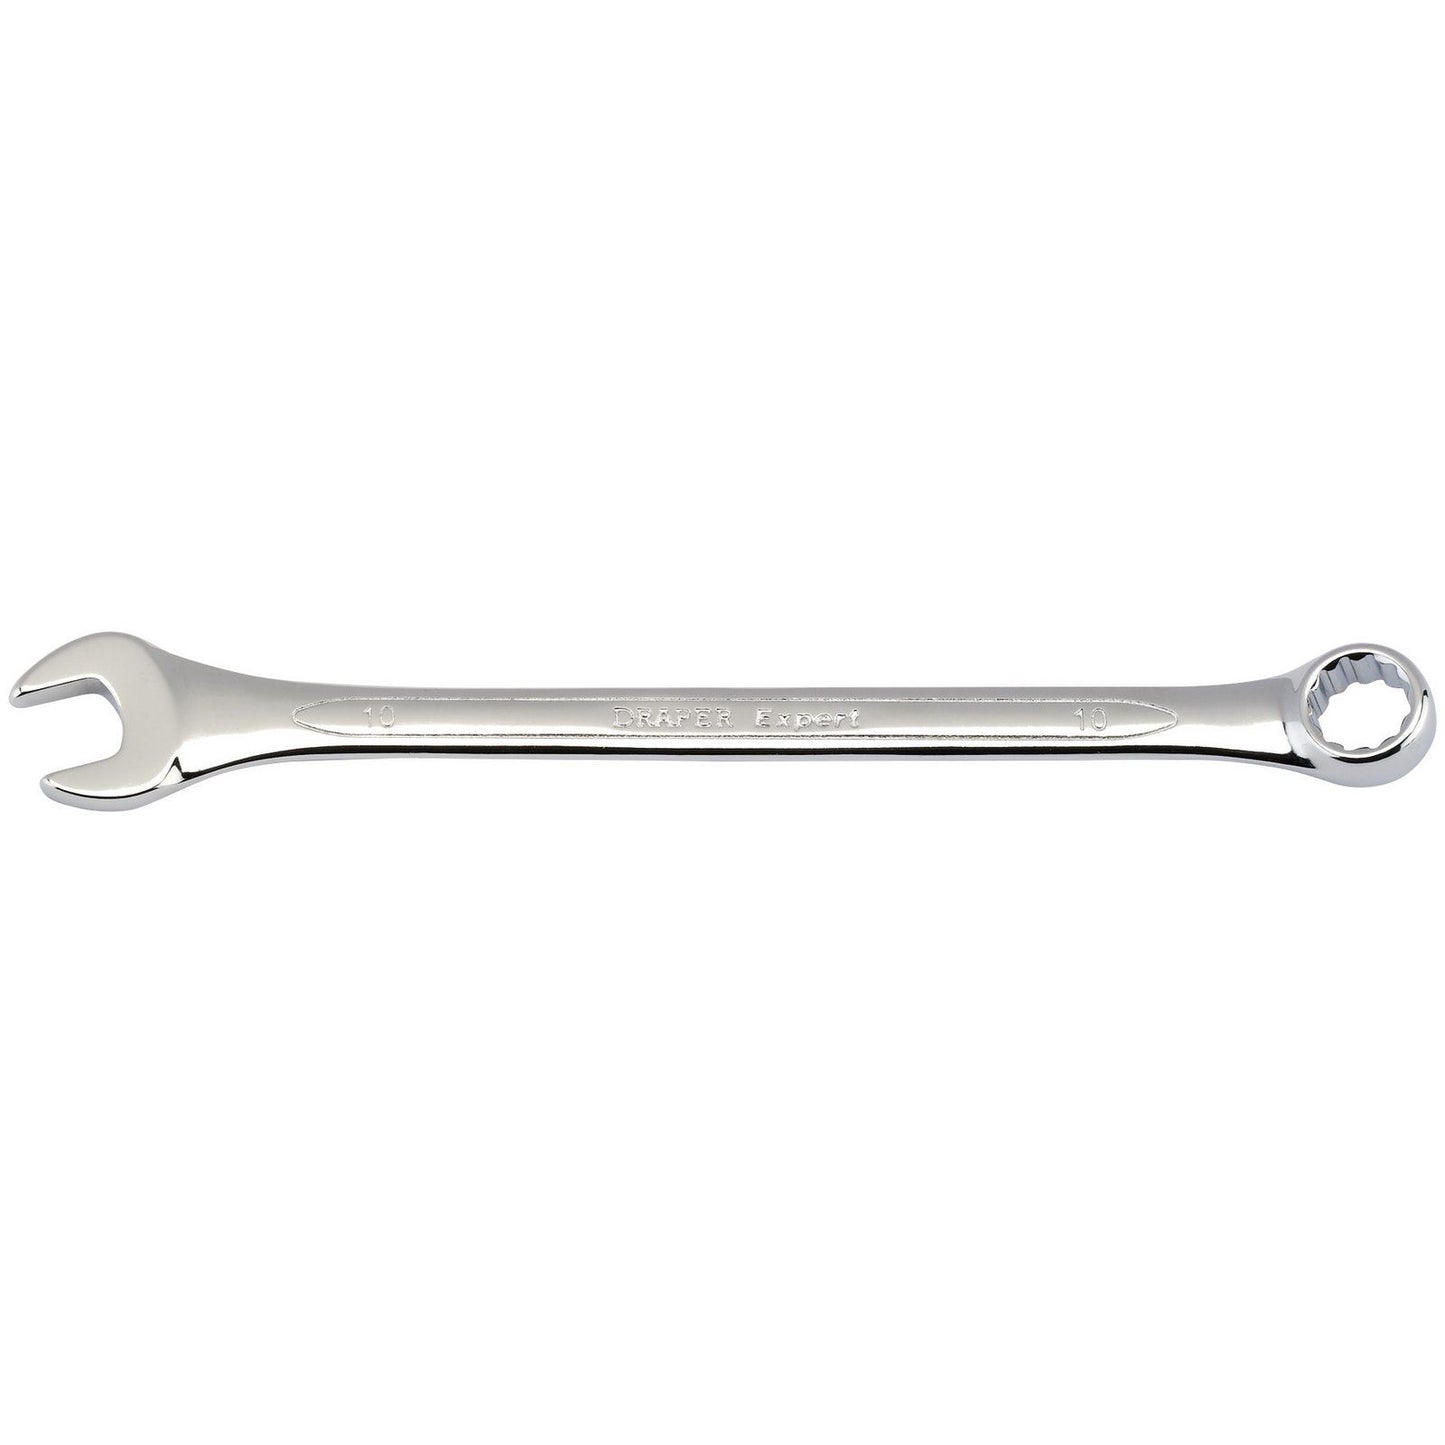 Draper 35394 15mm Combination Wrench / Spanner (Brand New)